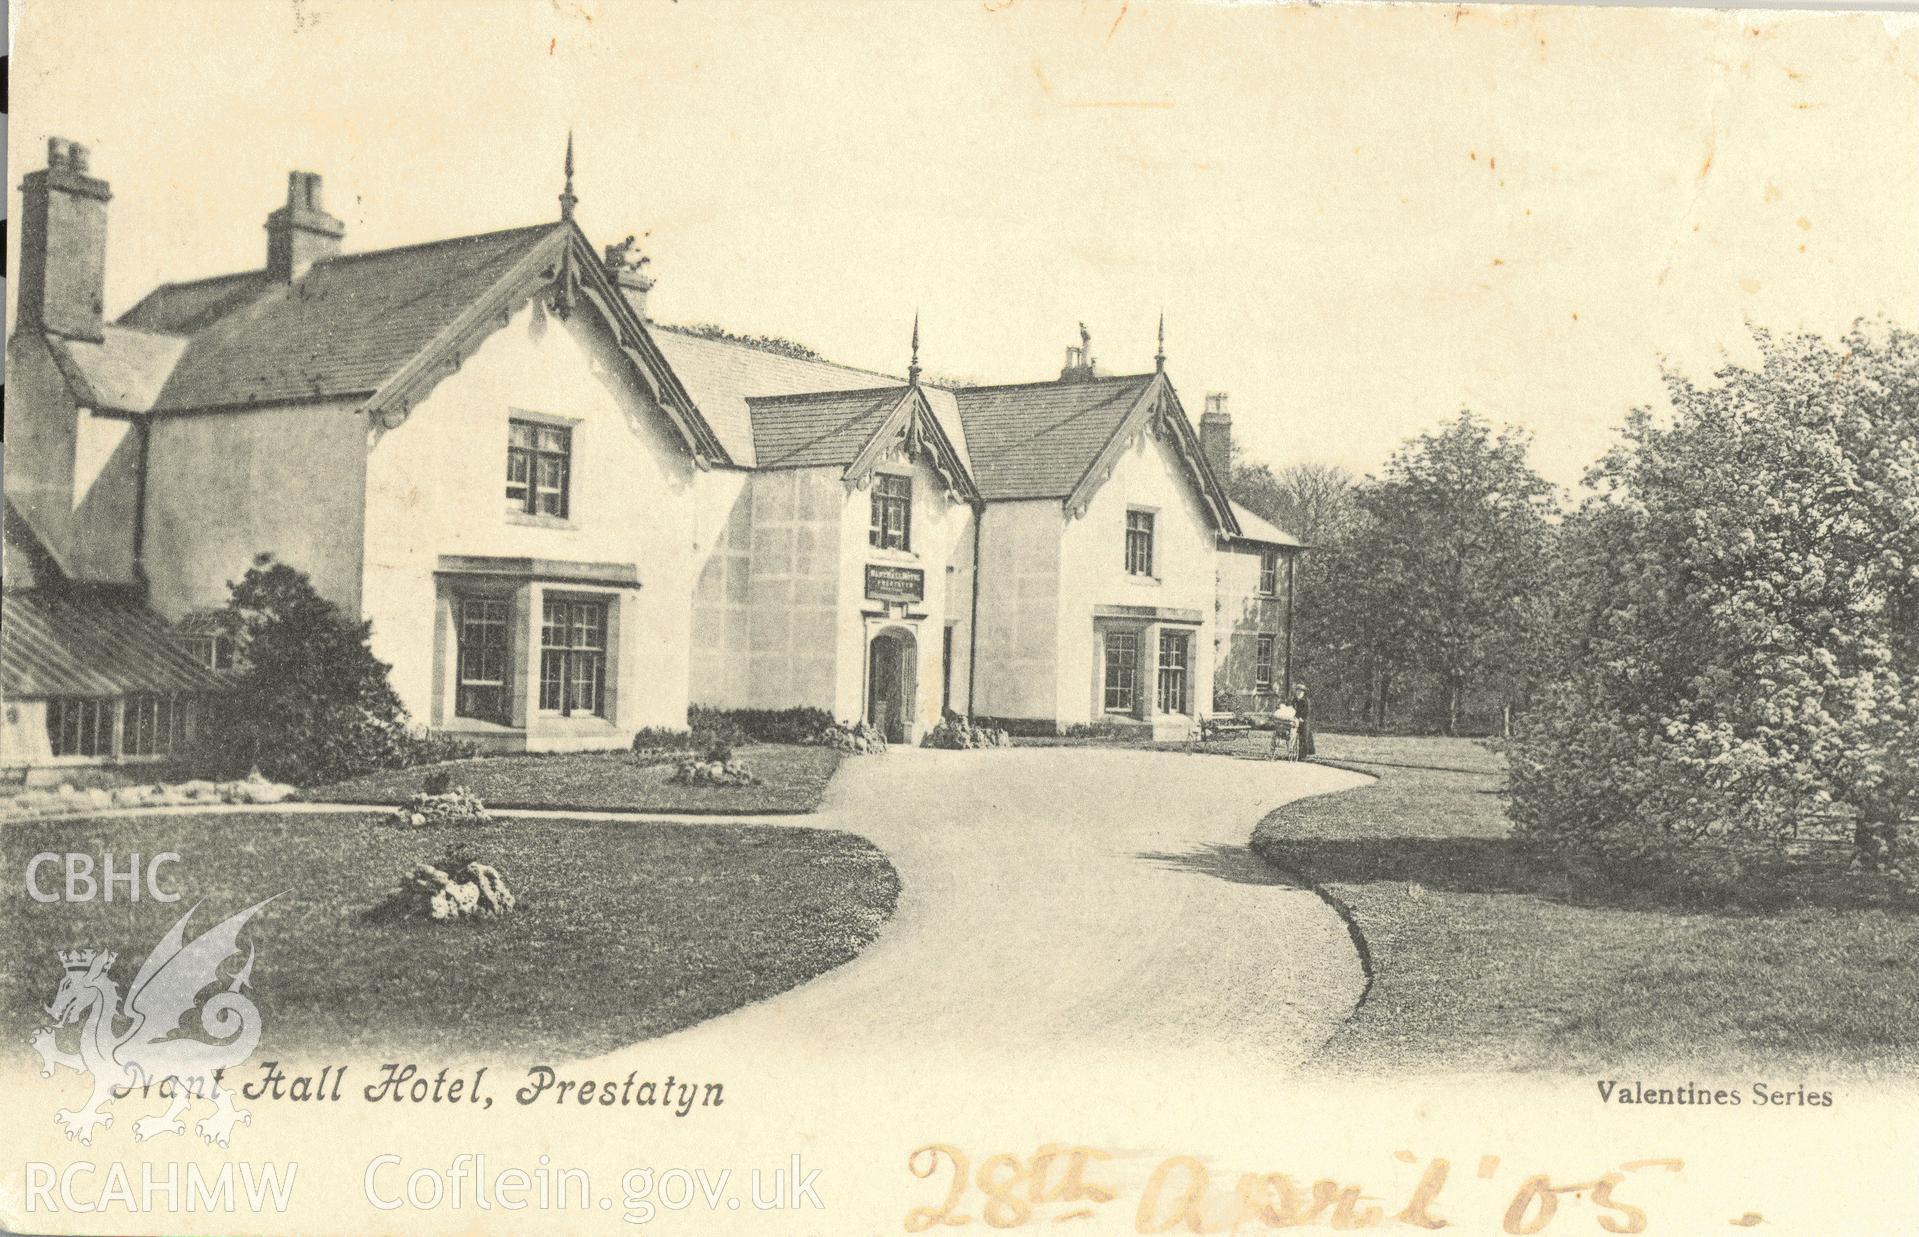 Digitised postcard image of Nant Hall Hotel, Prestatyn, Valentine's Series. Produced by Parks and Gardens Data Services, from an original item in the Peter Davis Collection at Parks and Gardens UK. We hold only web-resolution images of this collection, suitable for viewing on screen and for research purposes only. We do not hold the original images, or publication quality scans.